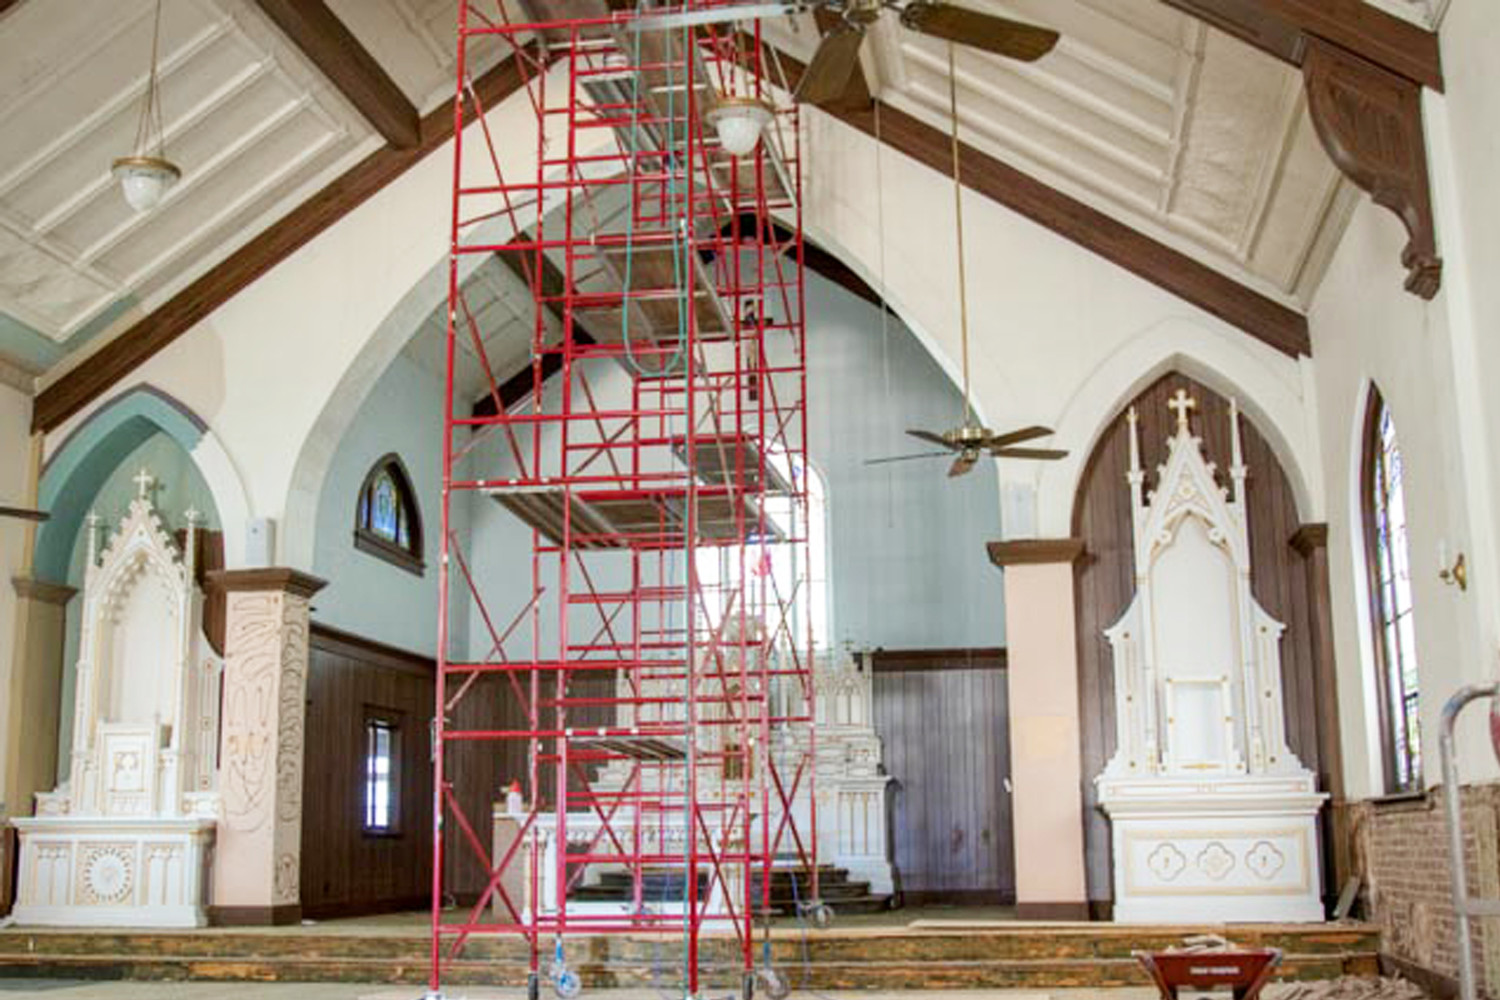 Scaffolding allows plasterers and painters to reach the ceiling of the sanctuary and nave of the church.